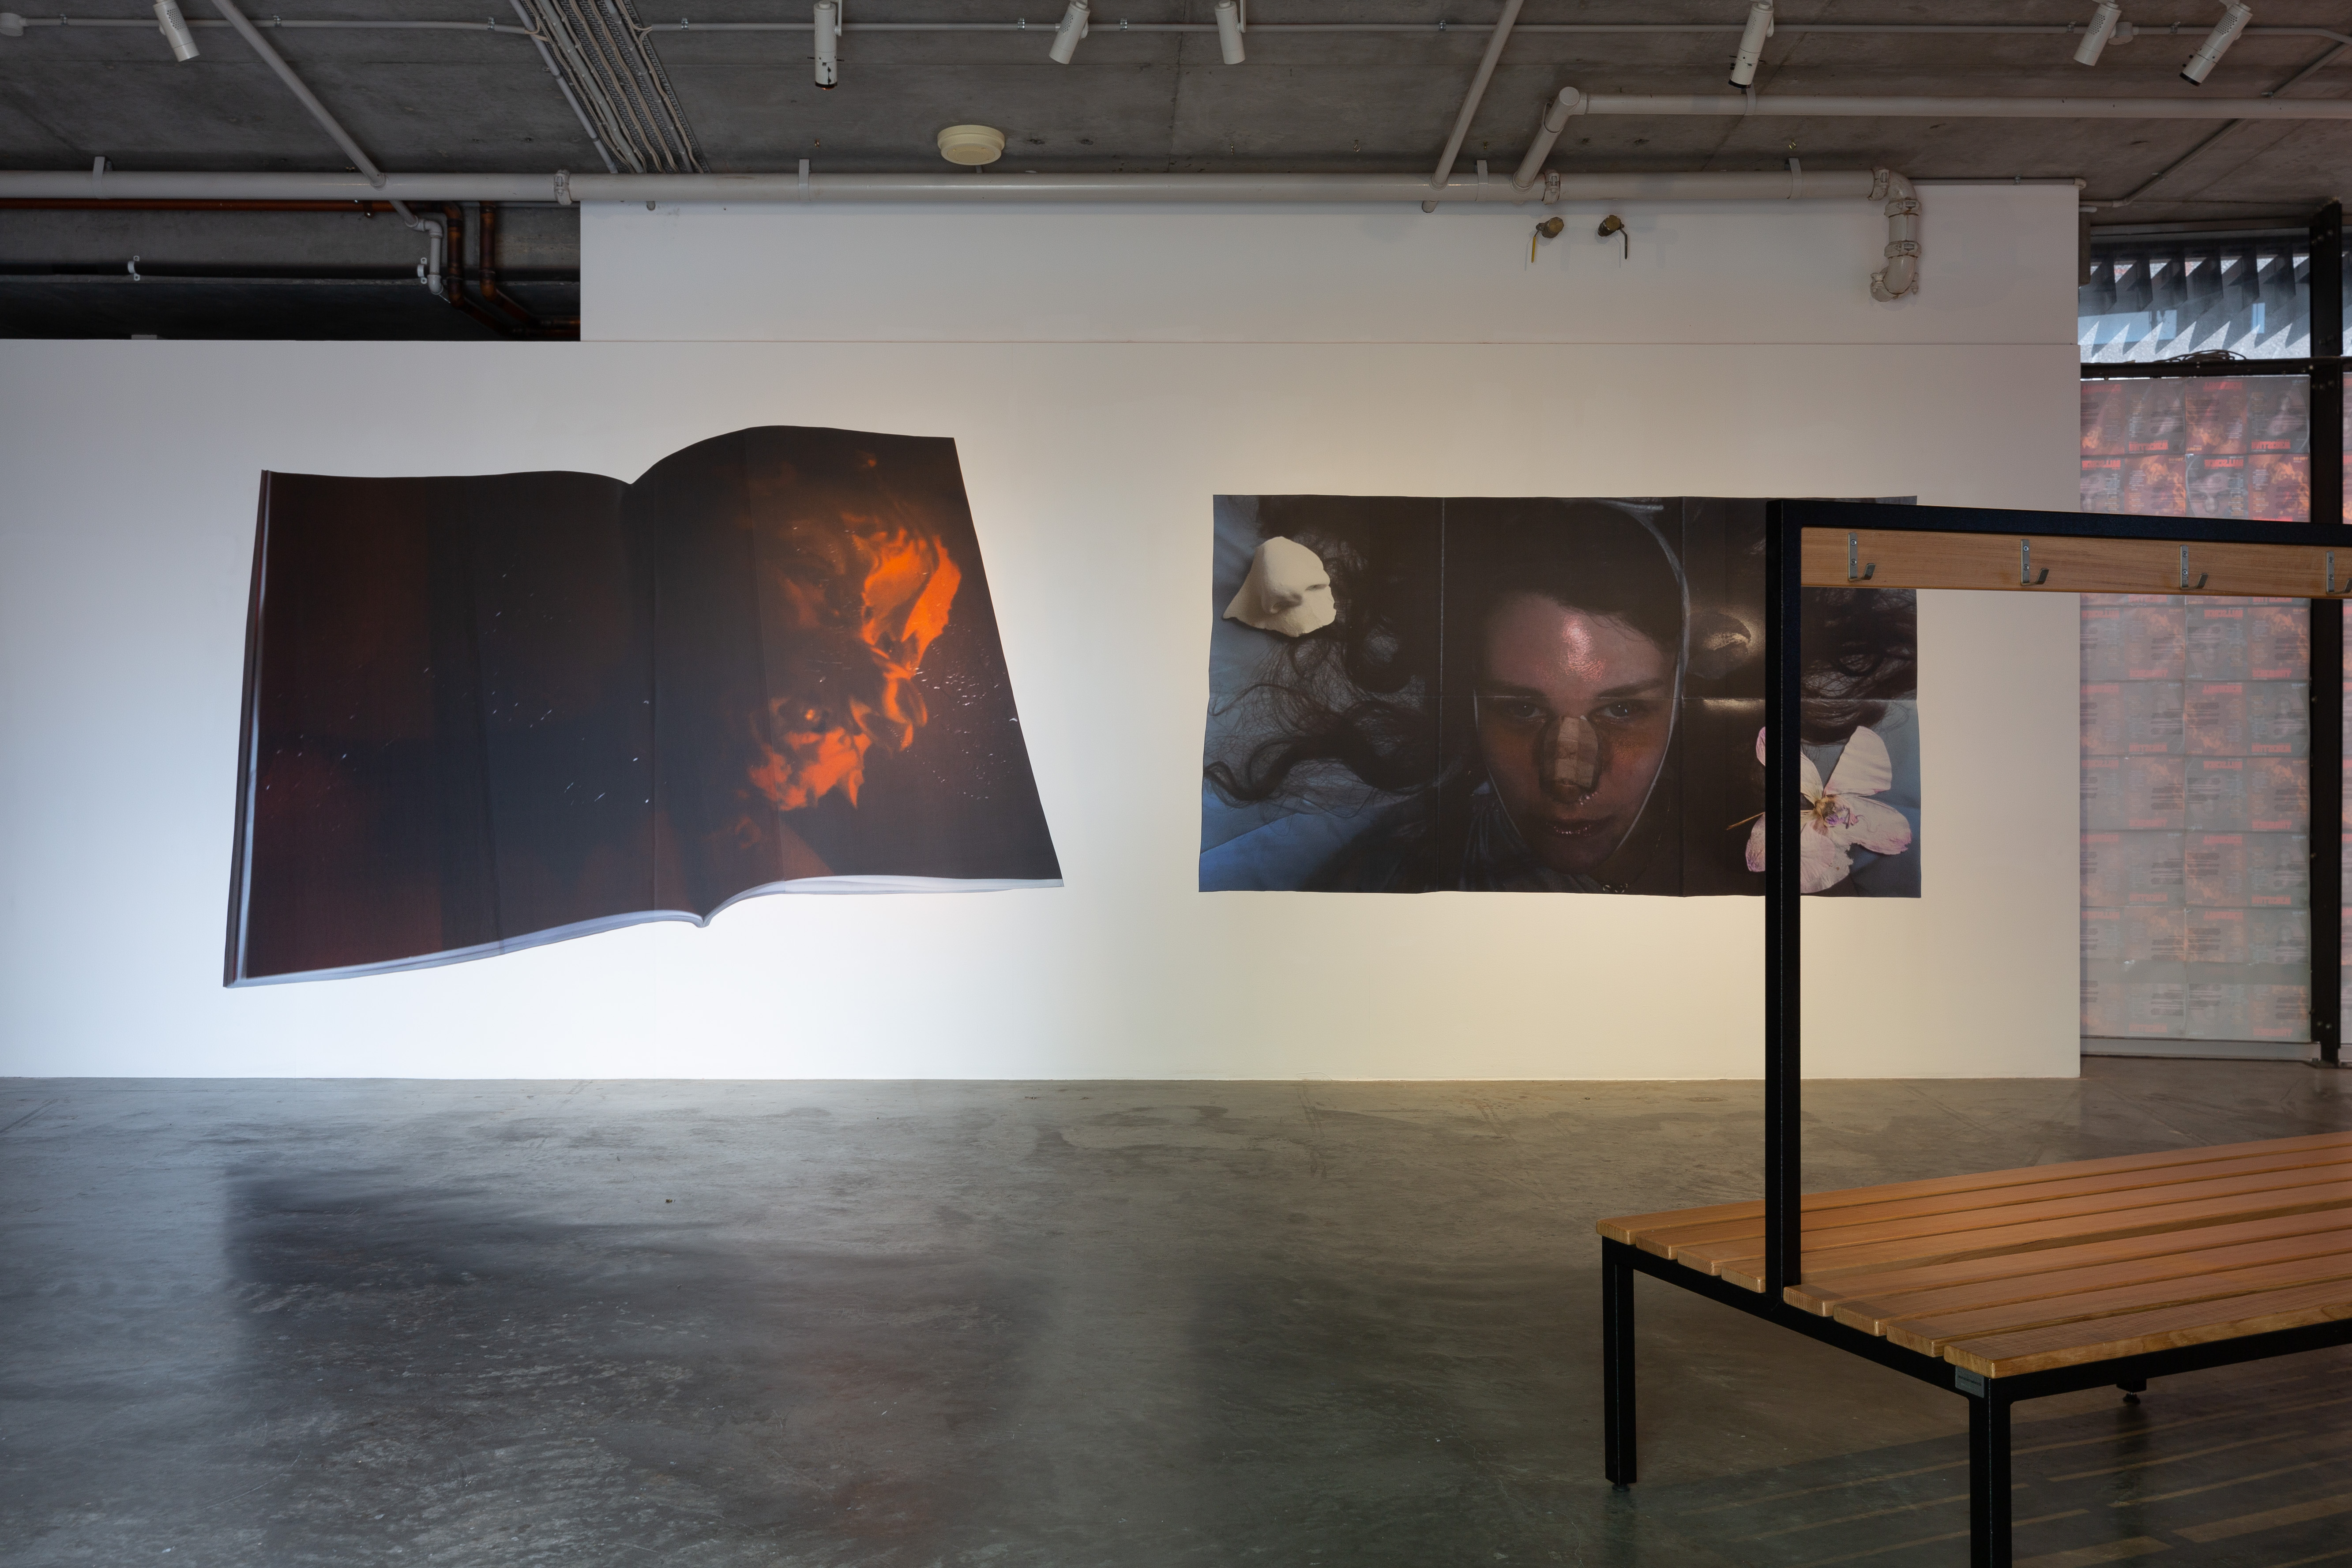 Install view: Chloe Corkran &amp; Athena Thebus, <em>In Dramatic Roles Such as These, </em>2022, wallpaper, 61 cm x 1.6 cm. Photography by Jek Maurer.